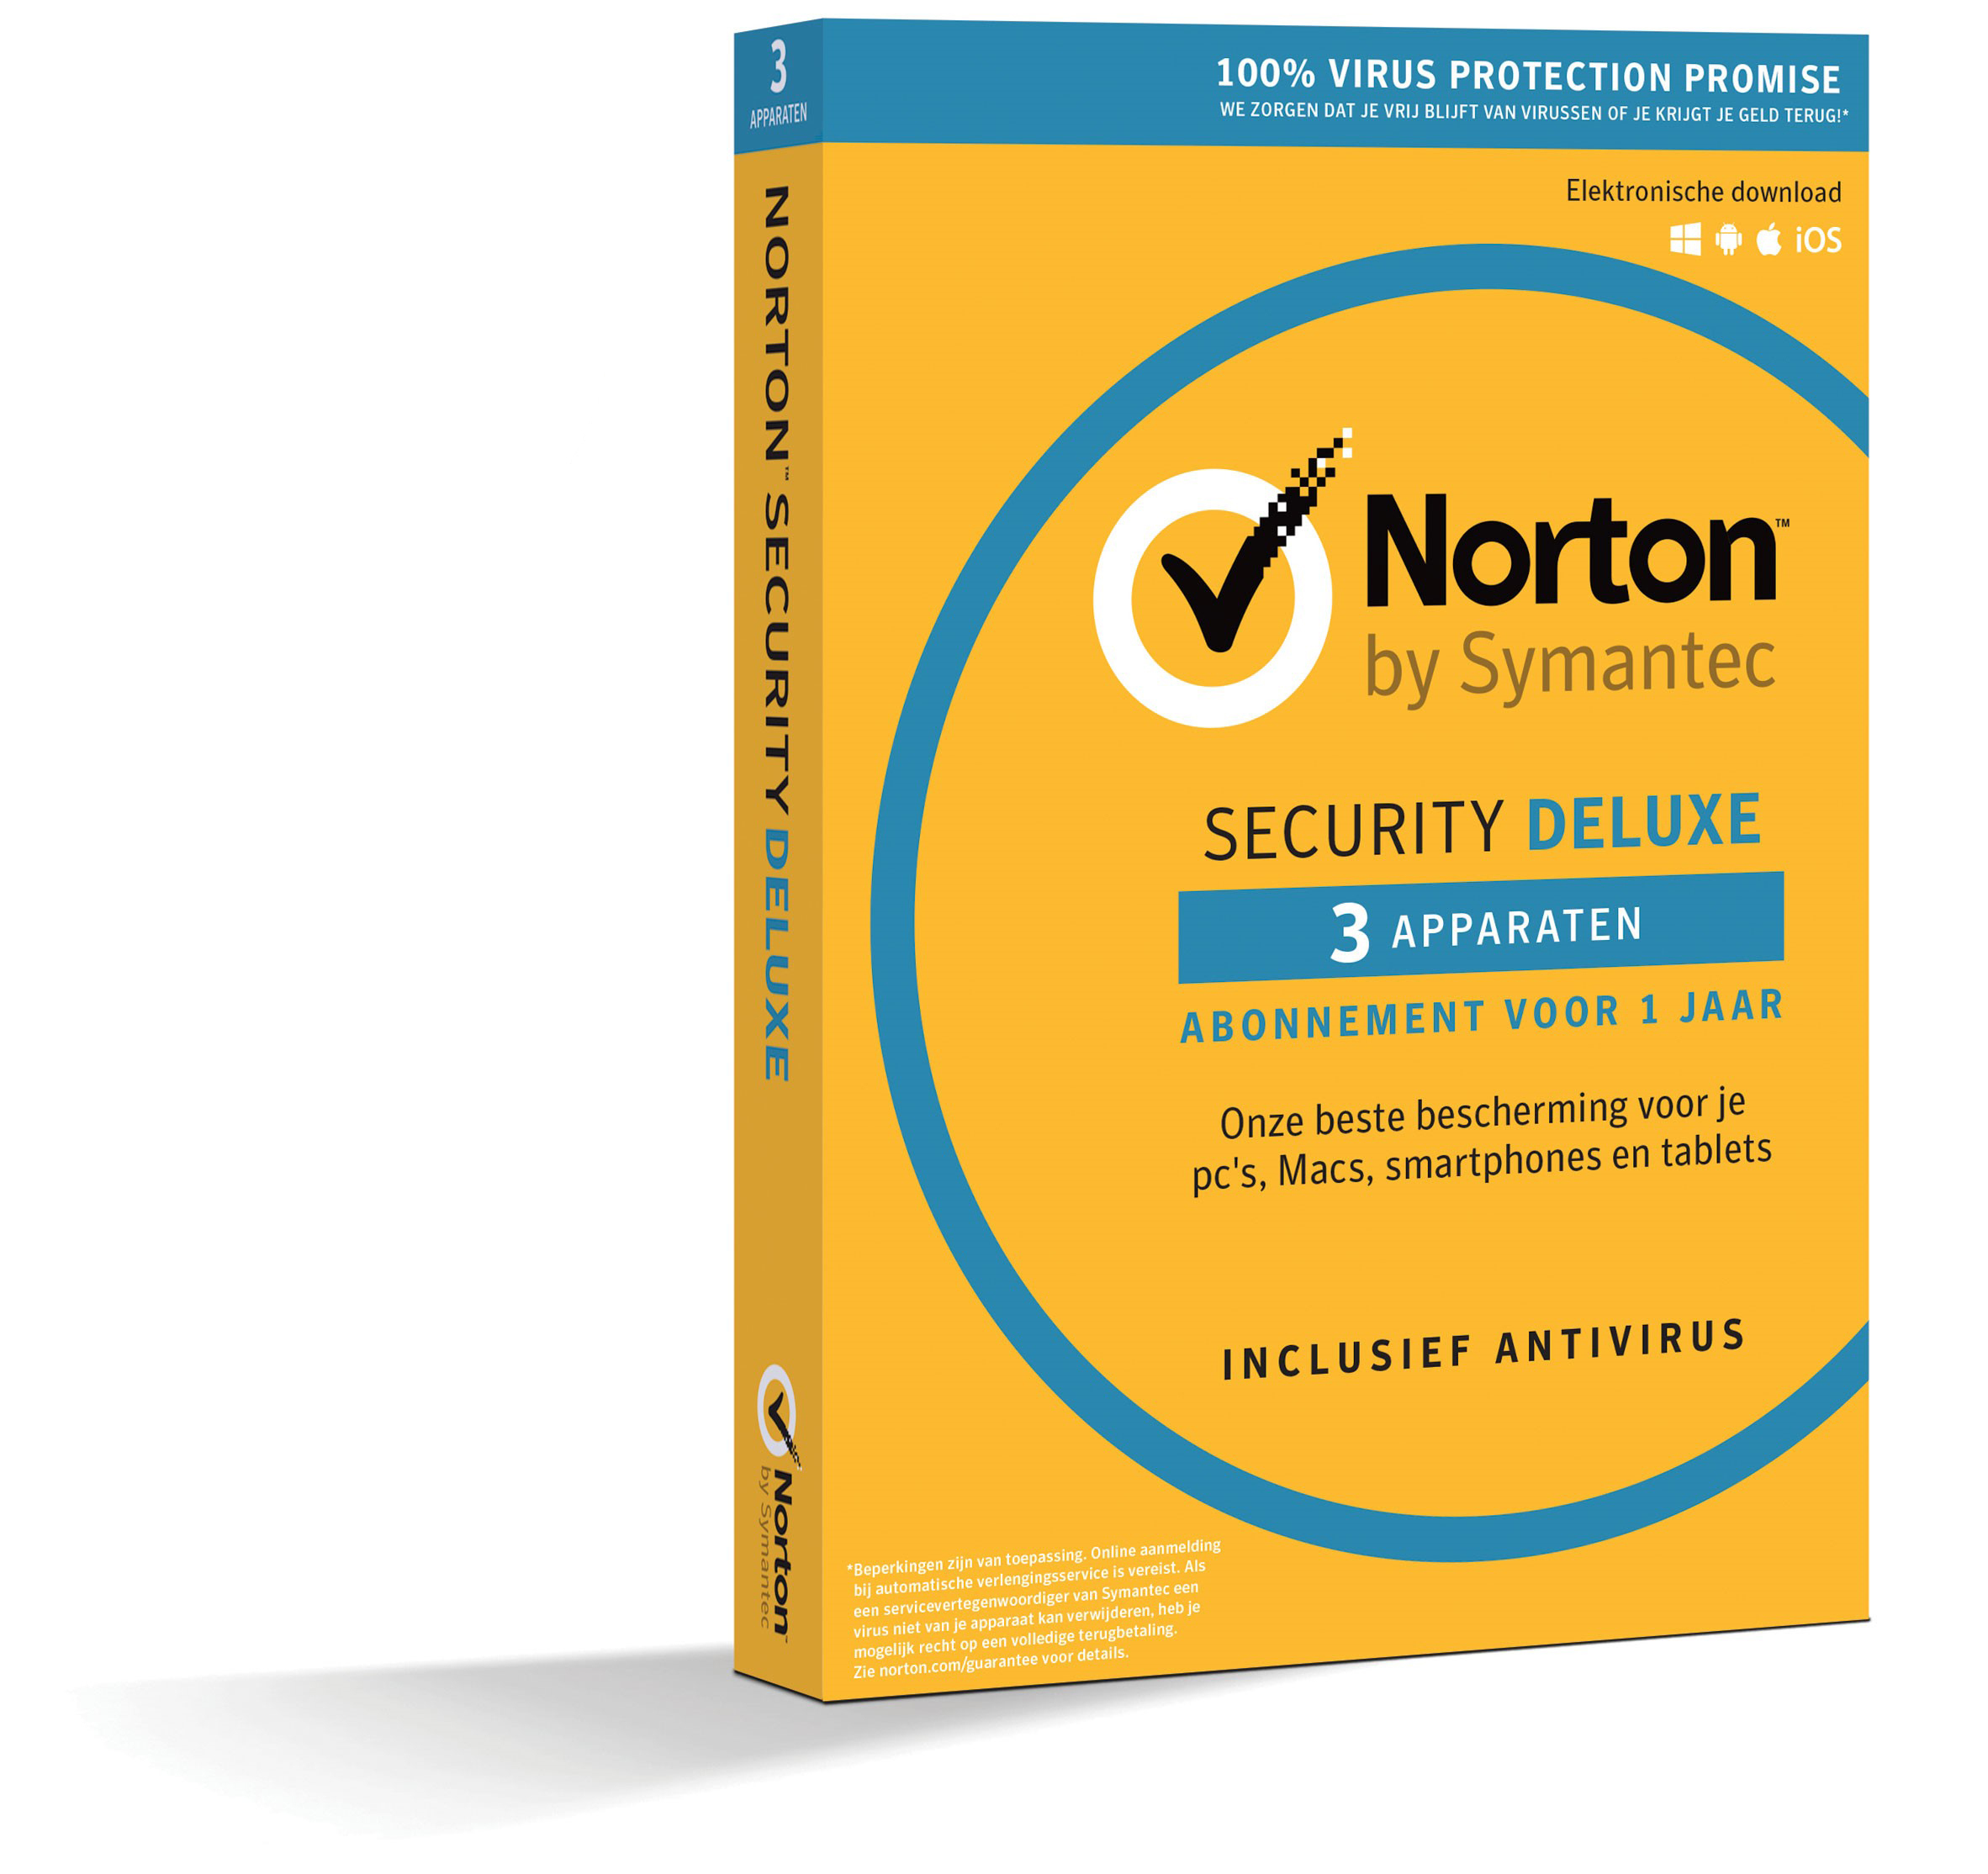 Norton Symantec Security Standard 2019 |1 Device | 1 Year | Antivirus Included | PC/Mac/iOS/Android